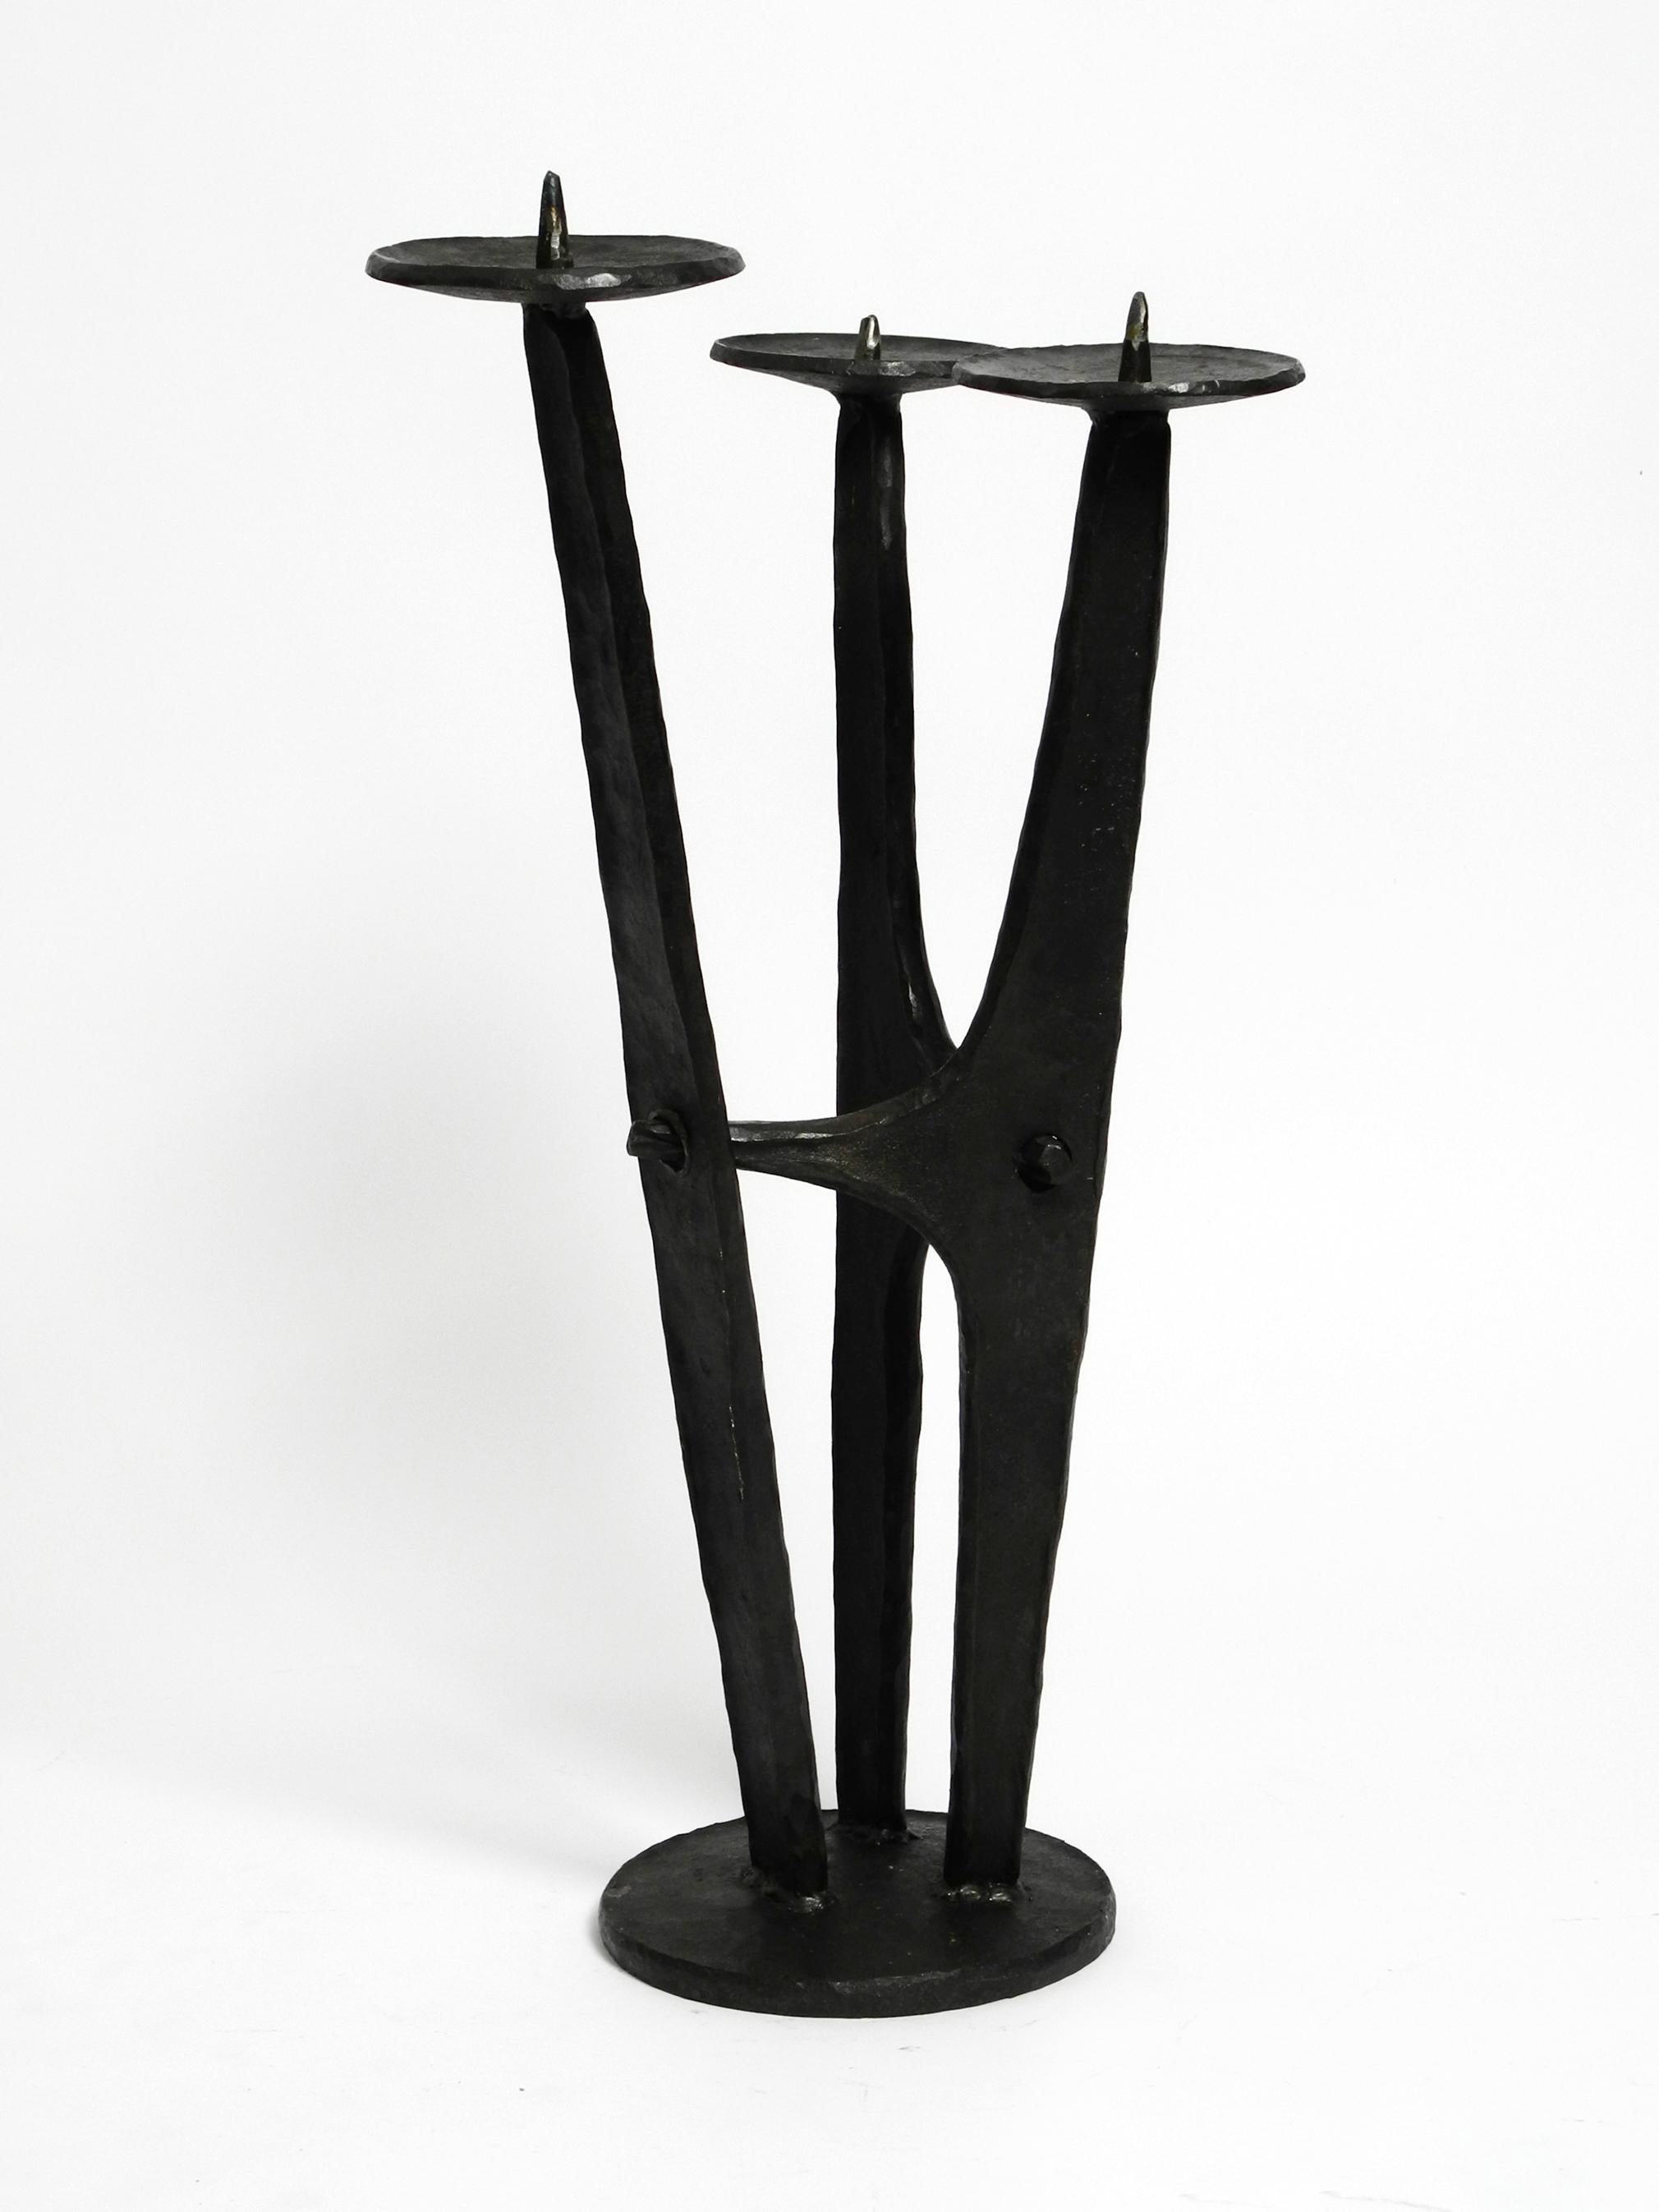 Large, heavy 50s floor candle holder made of wrought iron in Mid Century design For Sale 12